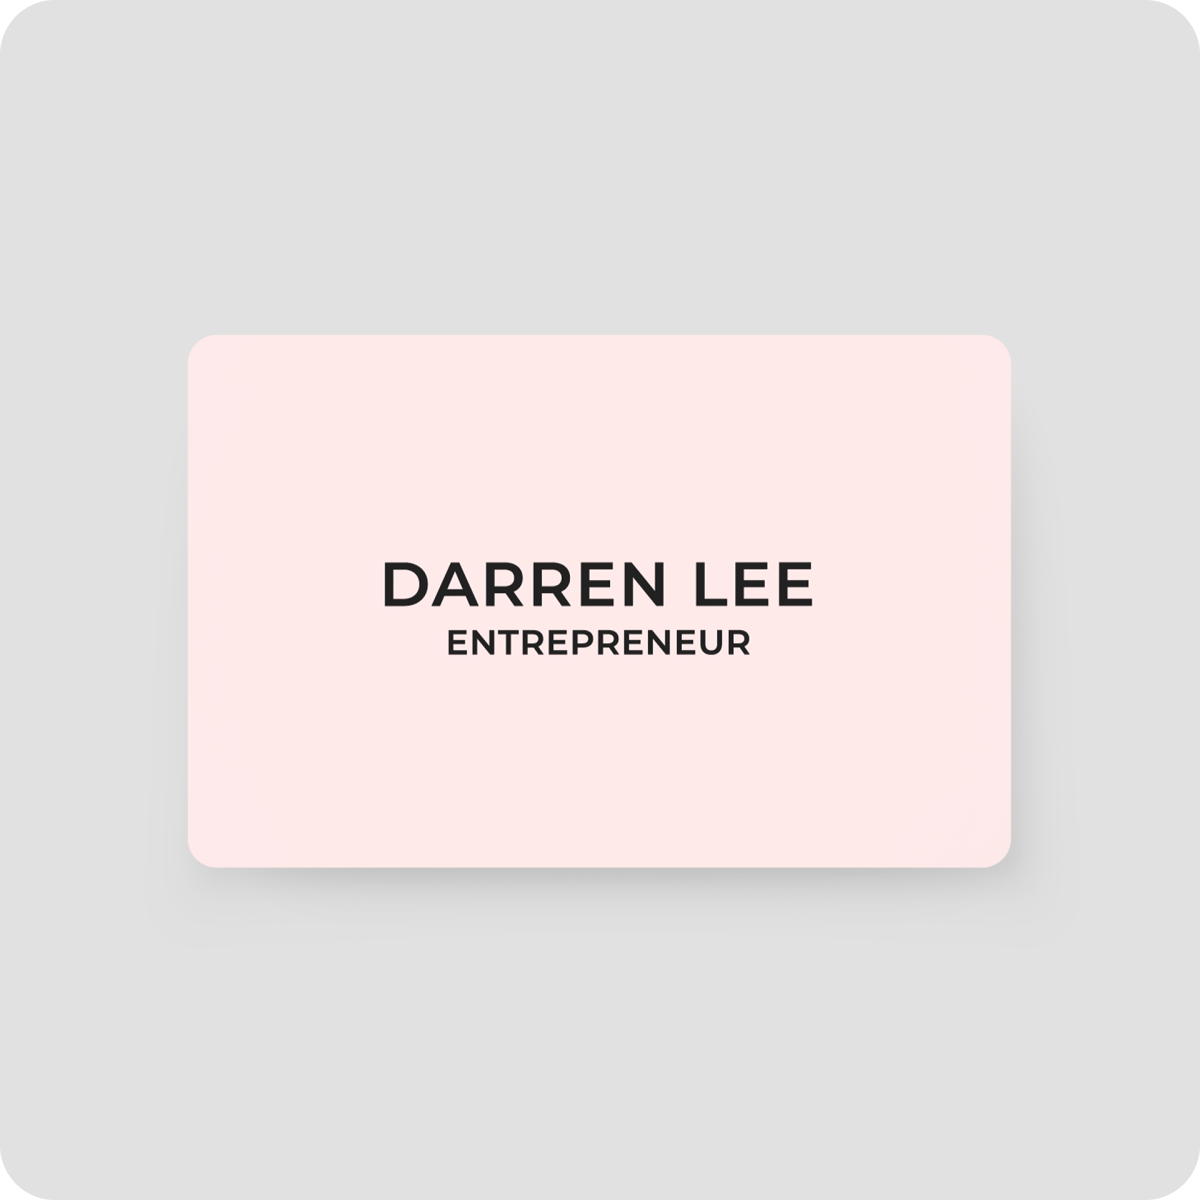 One Good Card: Smart Digital Name Card (Modern) - Personalised Near Field Communication (NFC) Digital Business Cards designs - Baby Pink